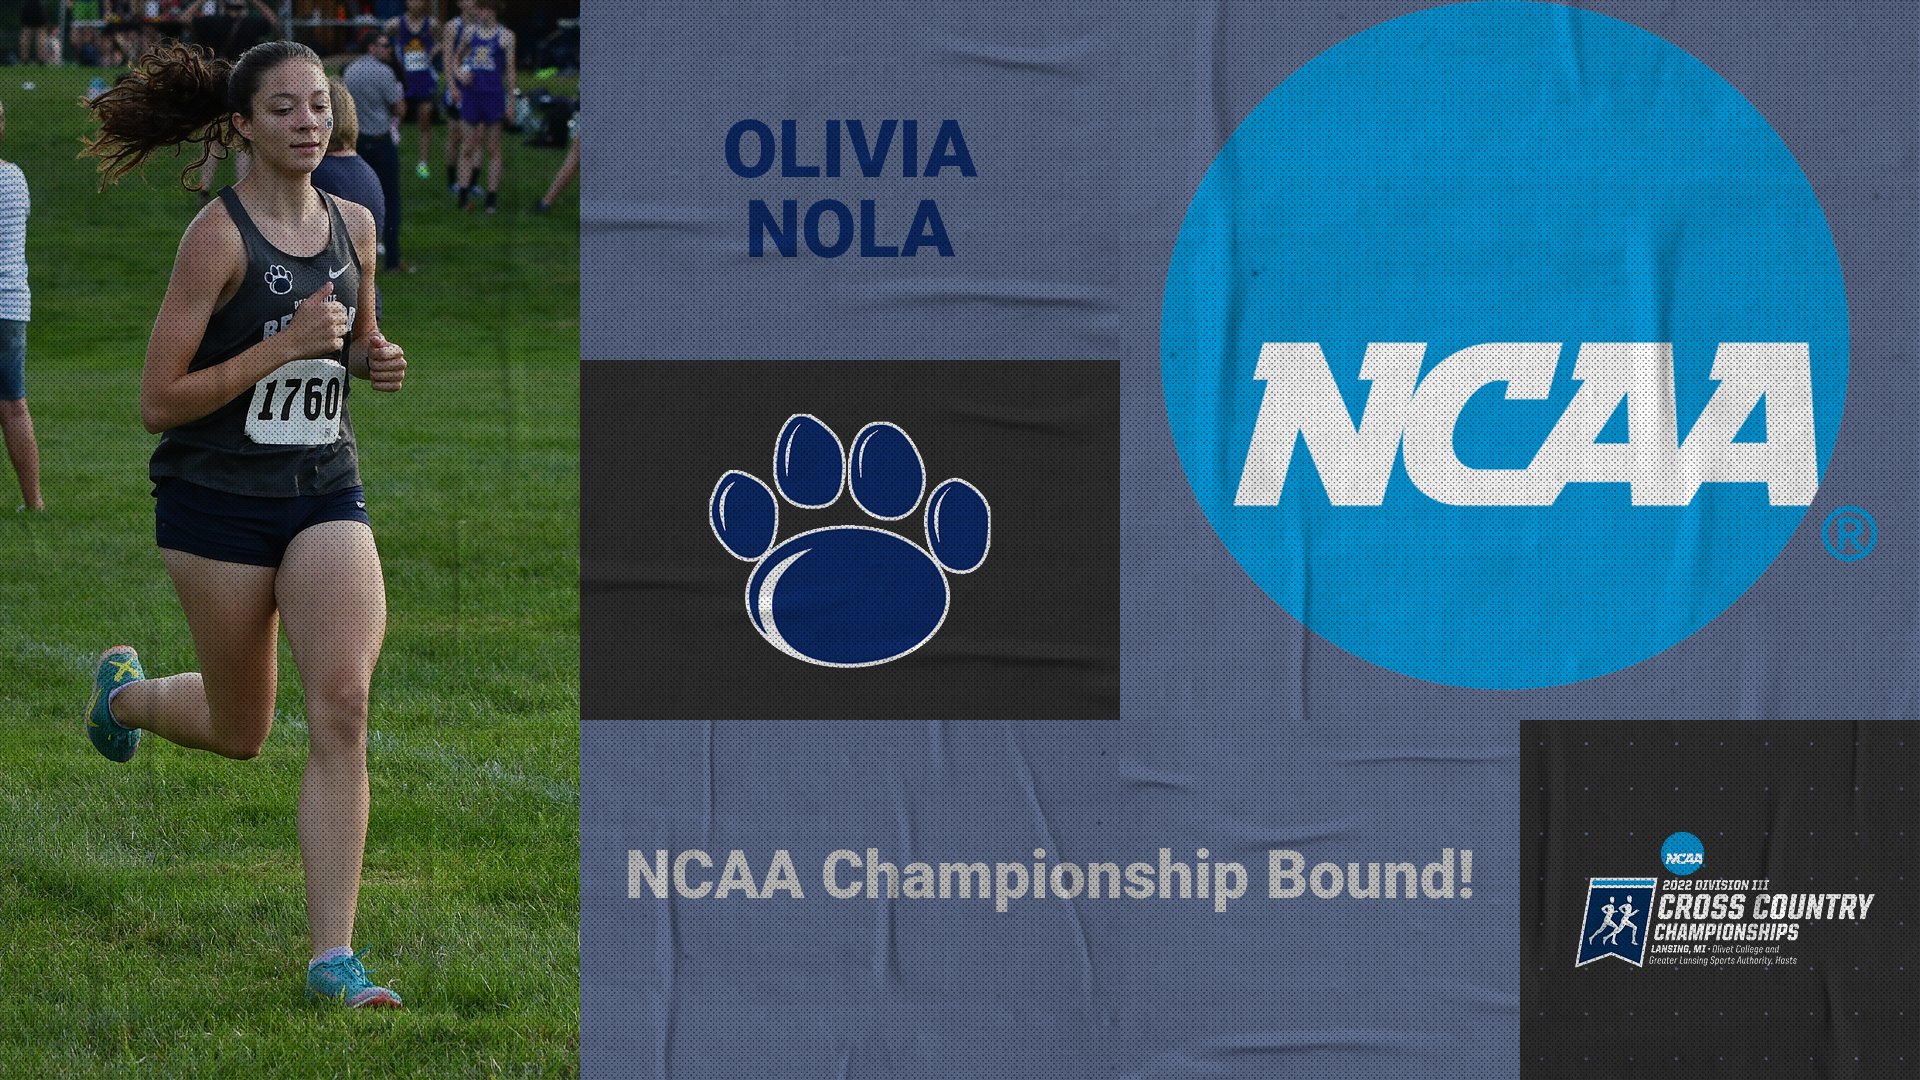 Nola Qualifies for NCAA Women's Cross Country Championships